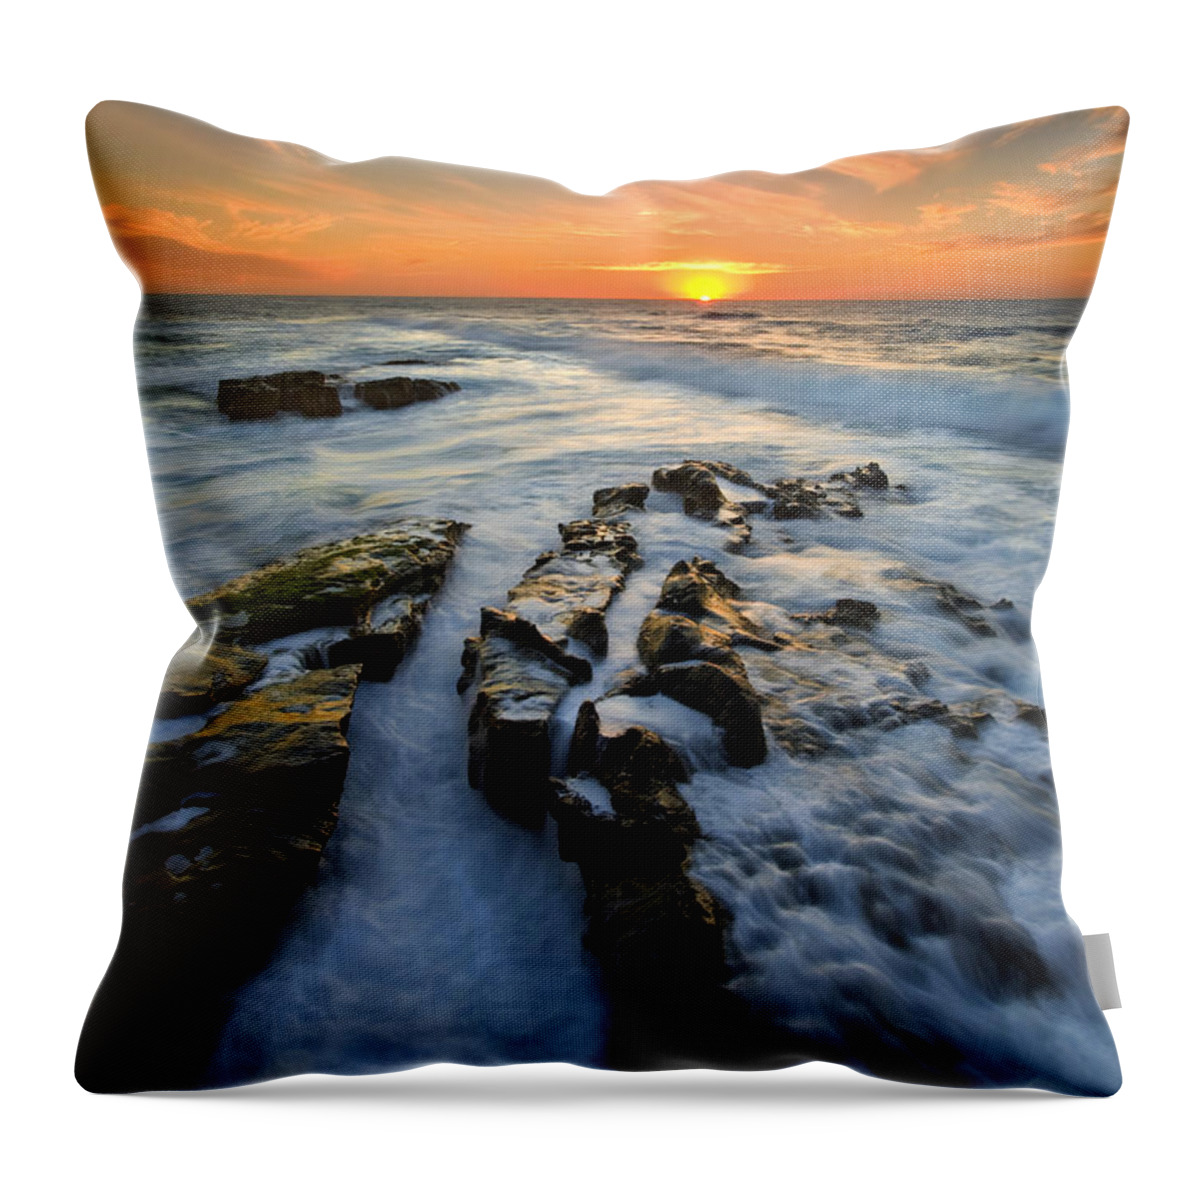 Sunset Throw Pillow featuring the photograph Engulfed by Michael Dawson